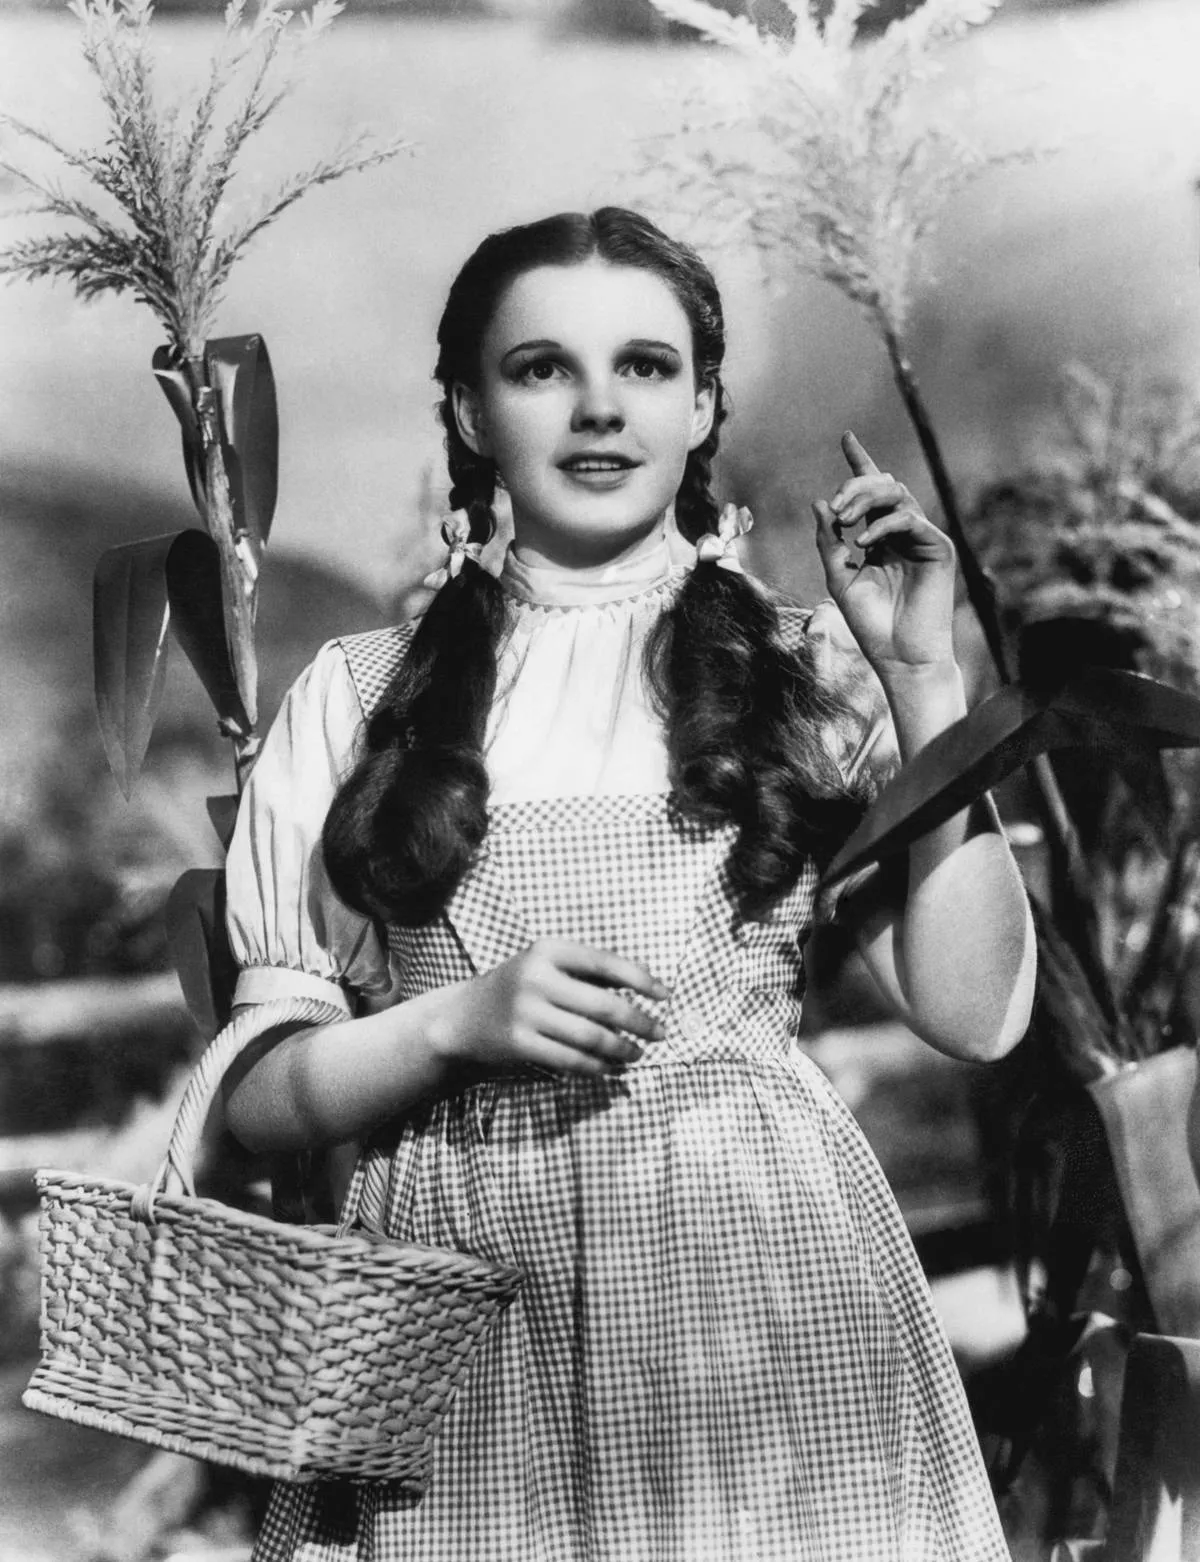 Judy Garland begins her journey in the Wizard of Oz, Hollywood, California, 1939